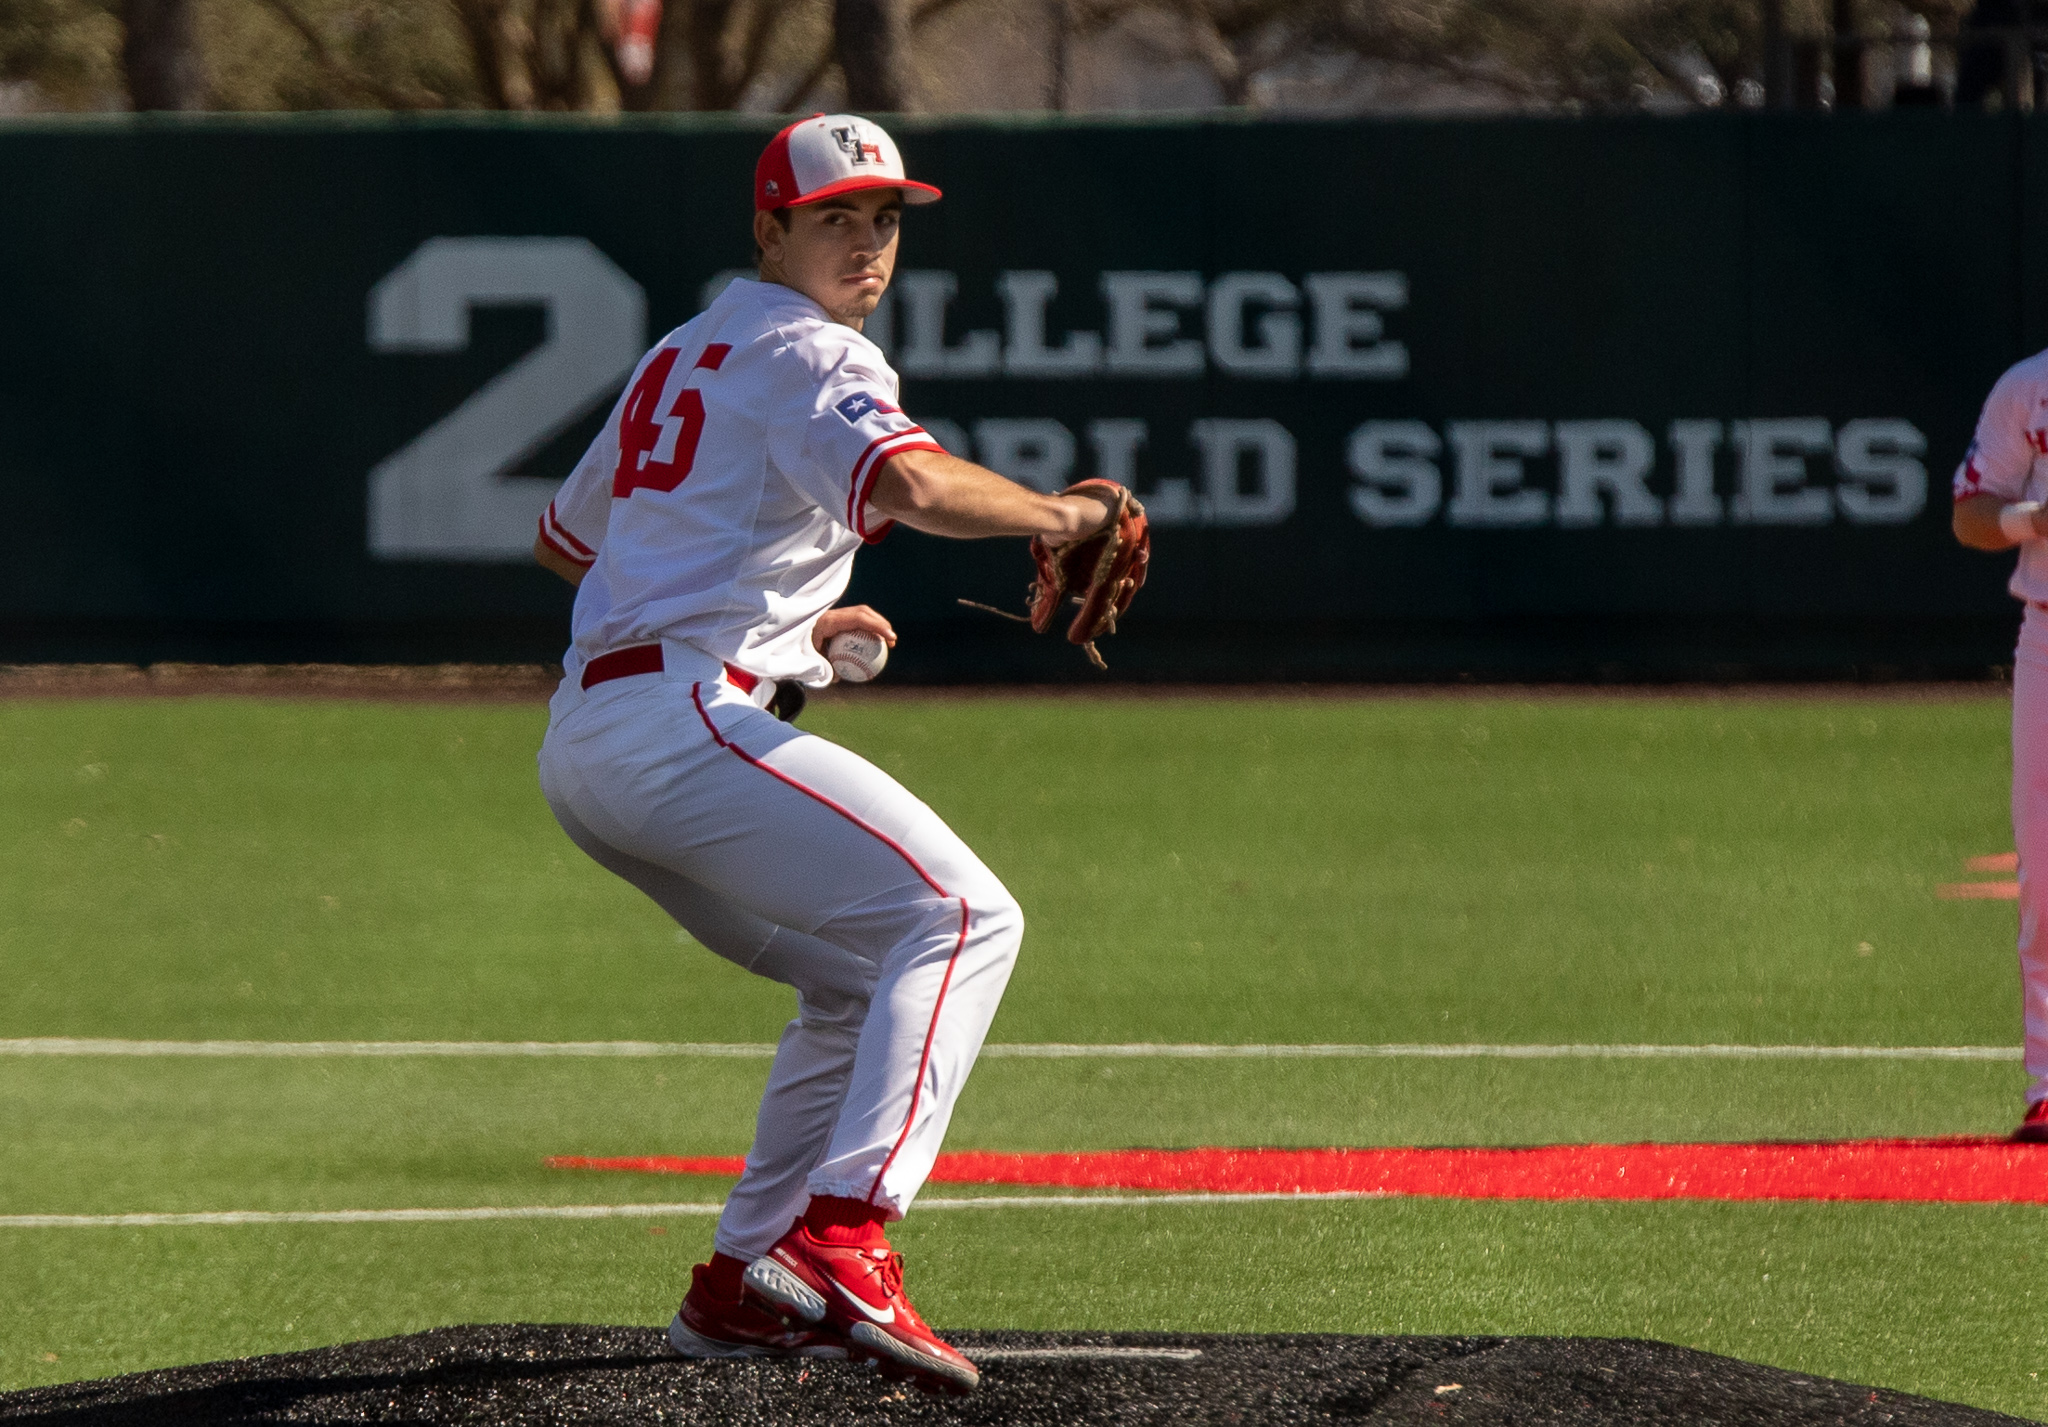 Robert Gasser anchored the UH pitching staff in 2021, posting a 2.63 ERA with 105 strikeouts in 85 2/3 innings pitched. | Andy Yanez/The Cougar